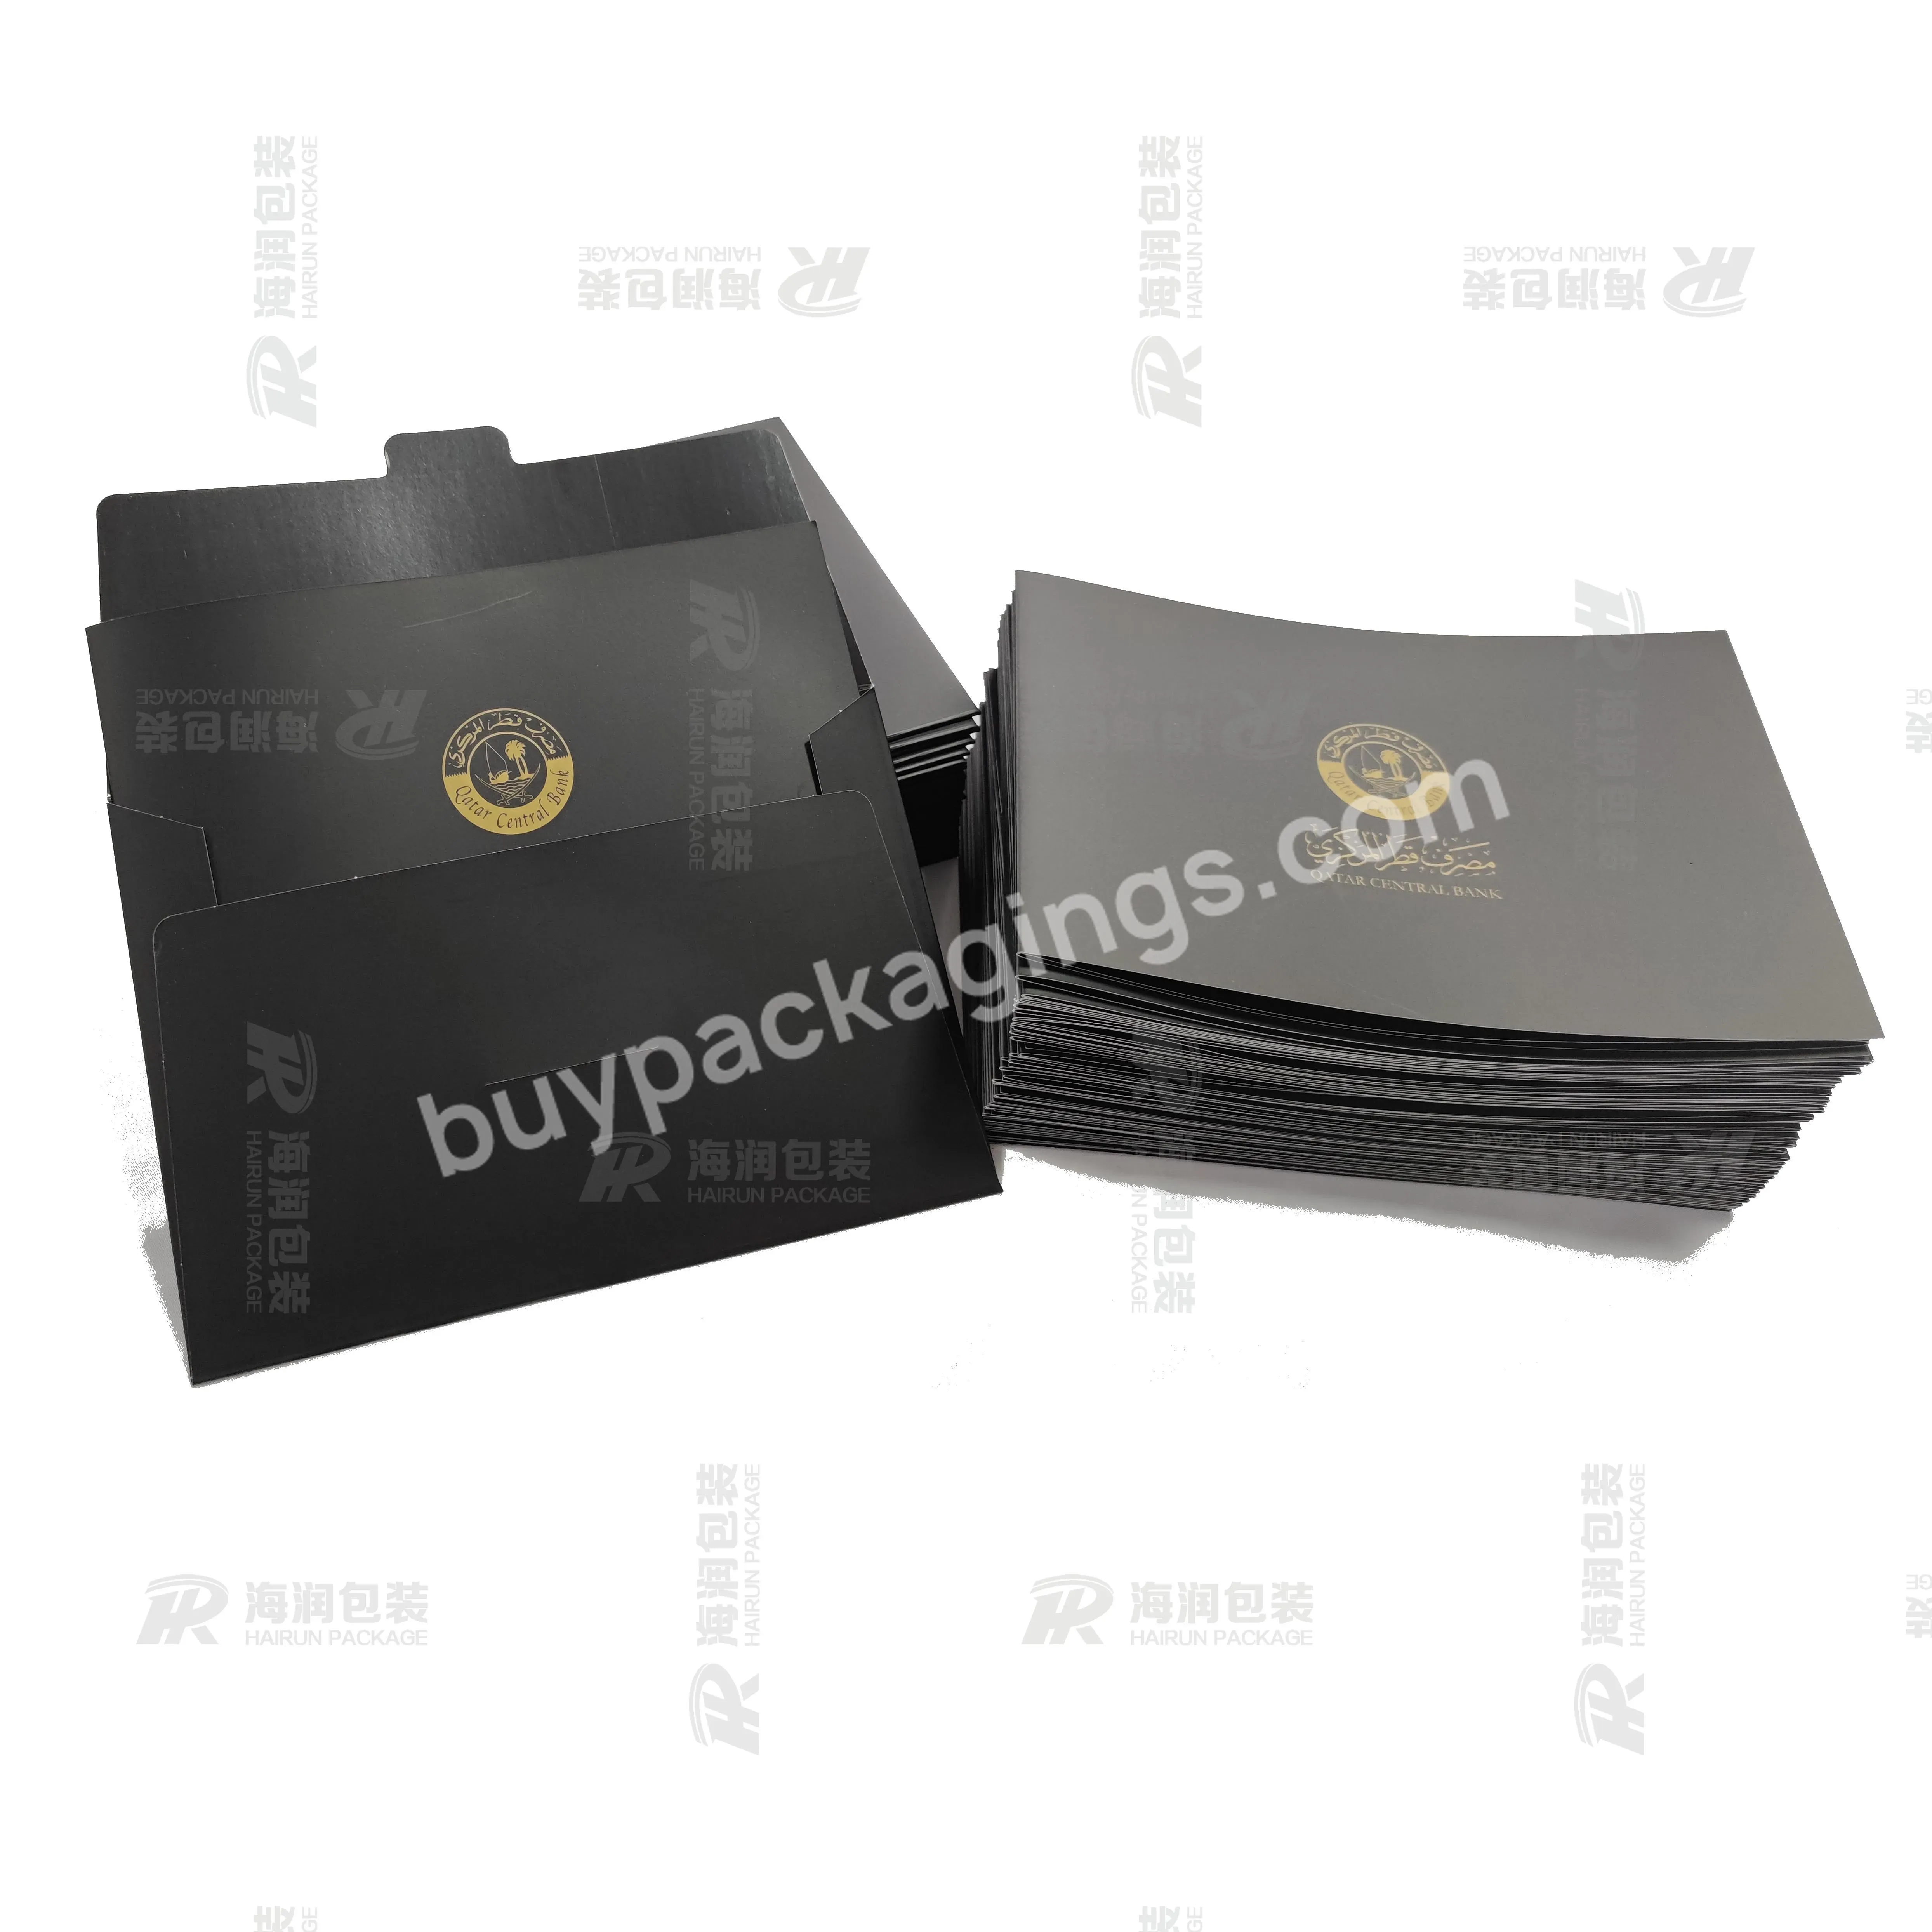 Coated Paper Envelopes Customized Wholesale Cheap Price Envelope Packaging 4 Color Printing Single Envelopes - Buy Envelopes,Envelope Packaging,Paper Envelopes.